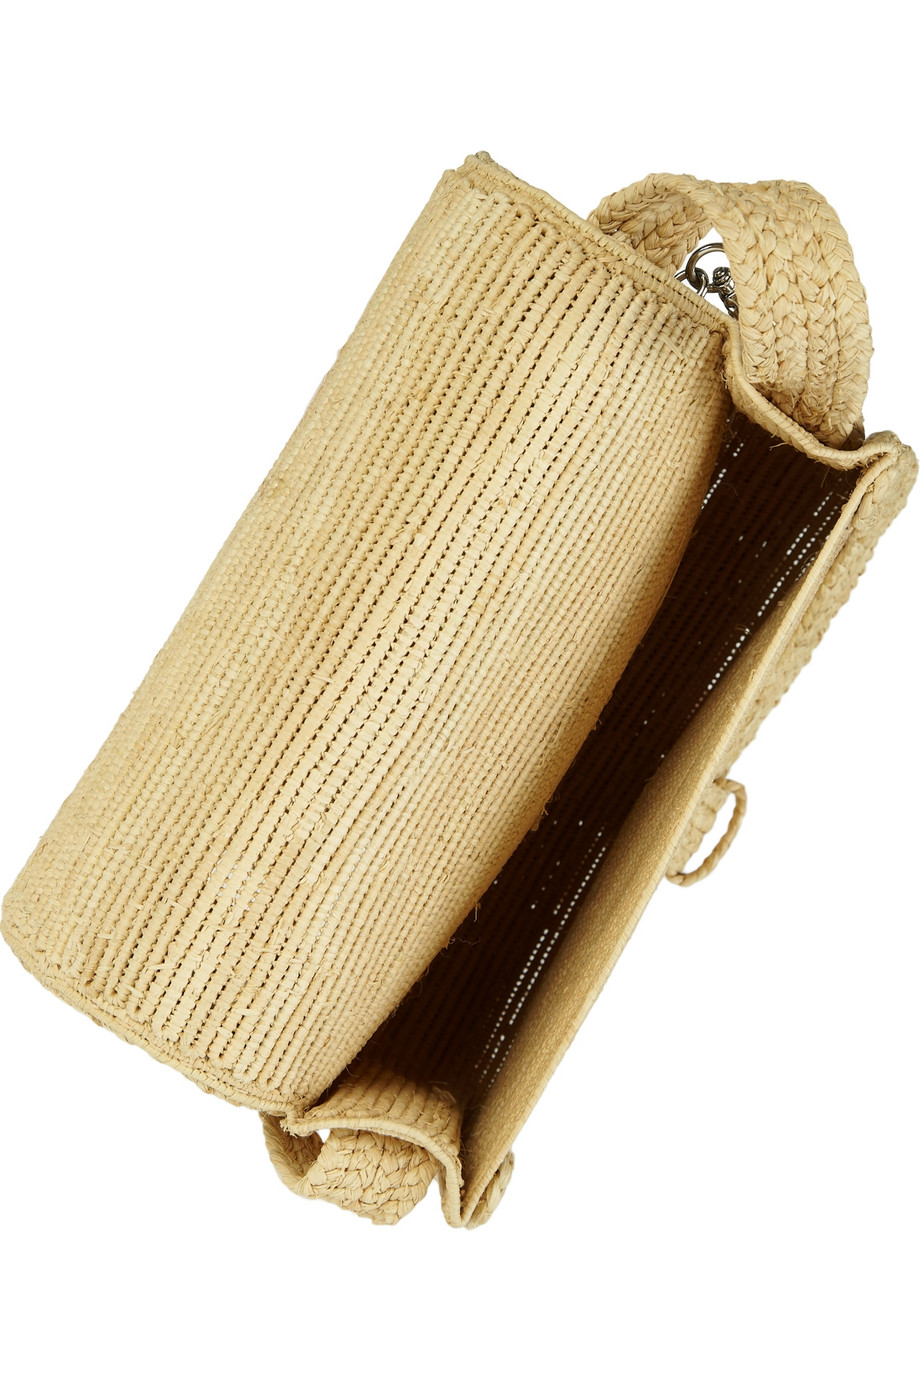 Ralph Lauren Collection Woven Straw Crossbody Bag in Natural - Lyst